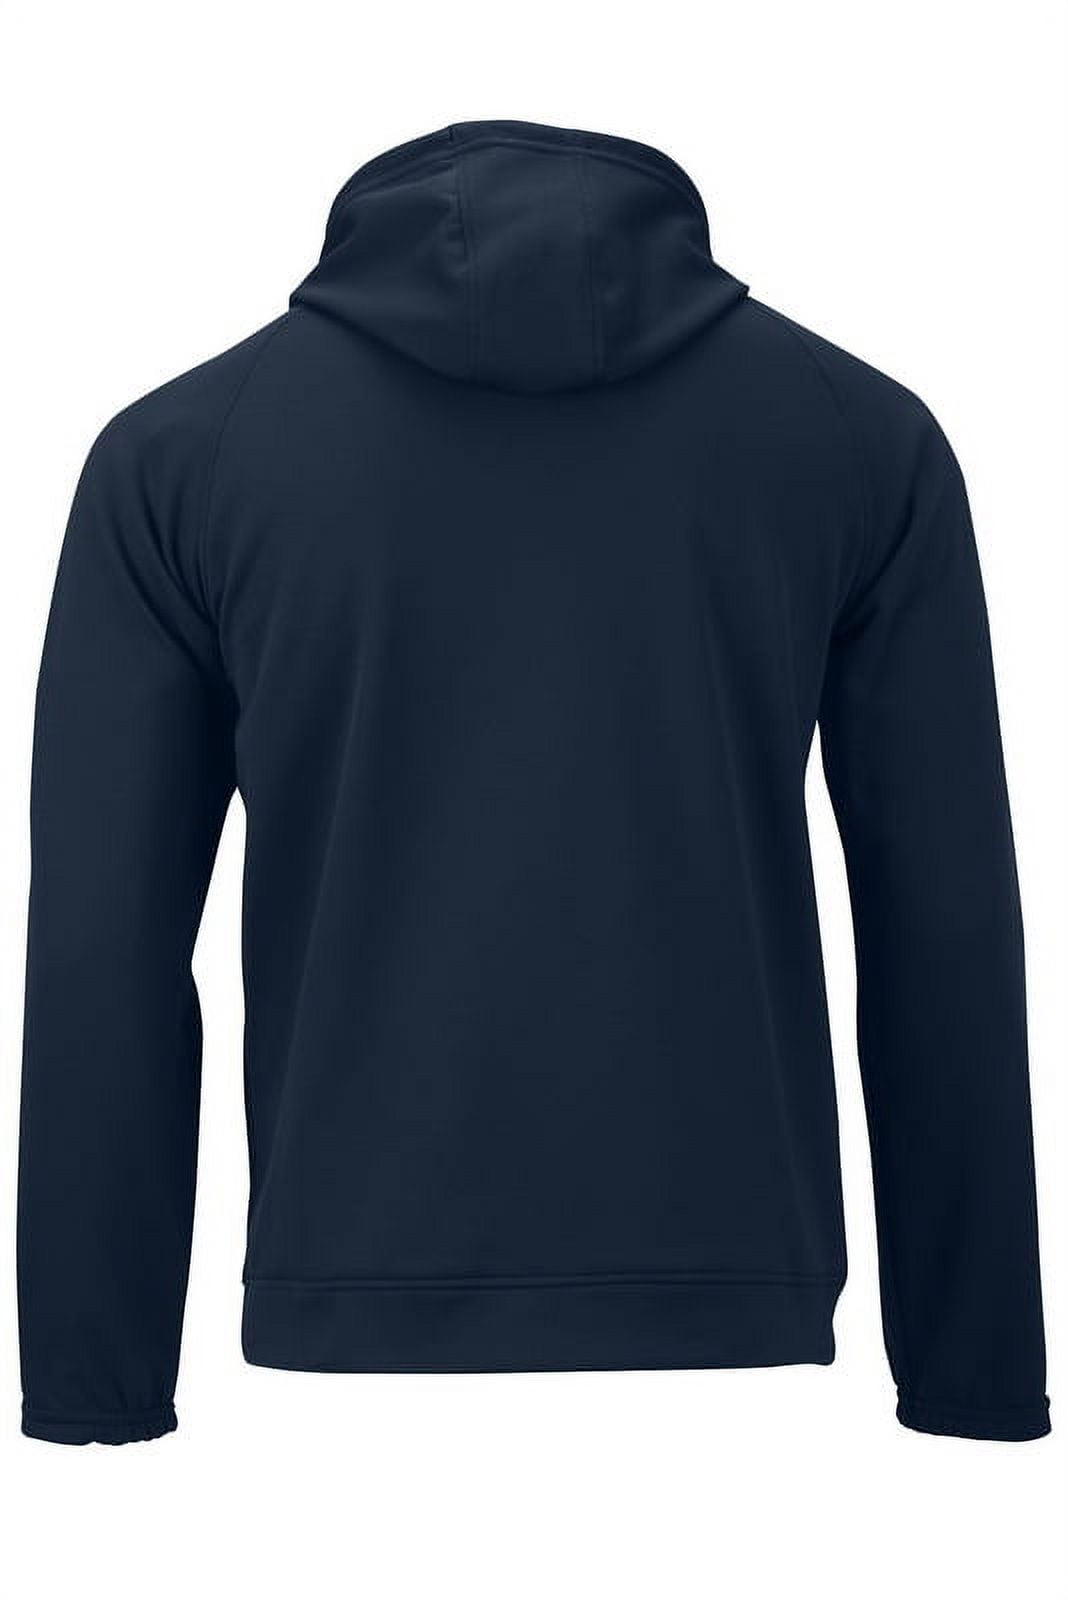 GymX Sheen Blue Compression Hoodie 2.0 - Sale - GYMX Merchandise LLP at Rs  849.00, Mumbai